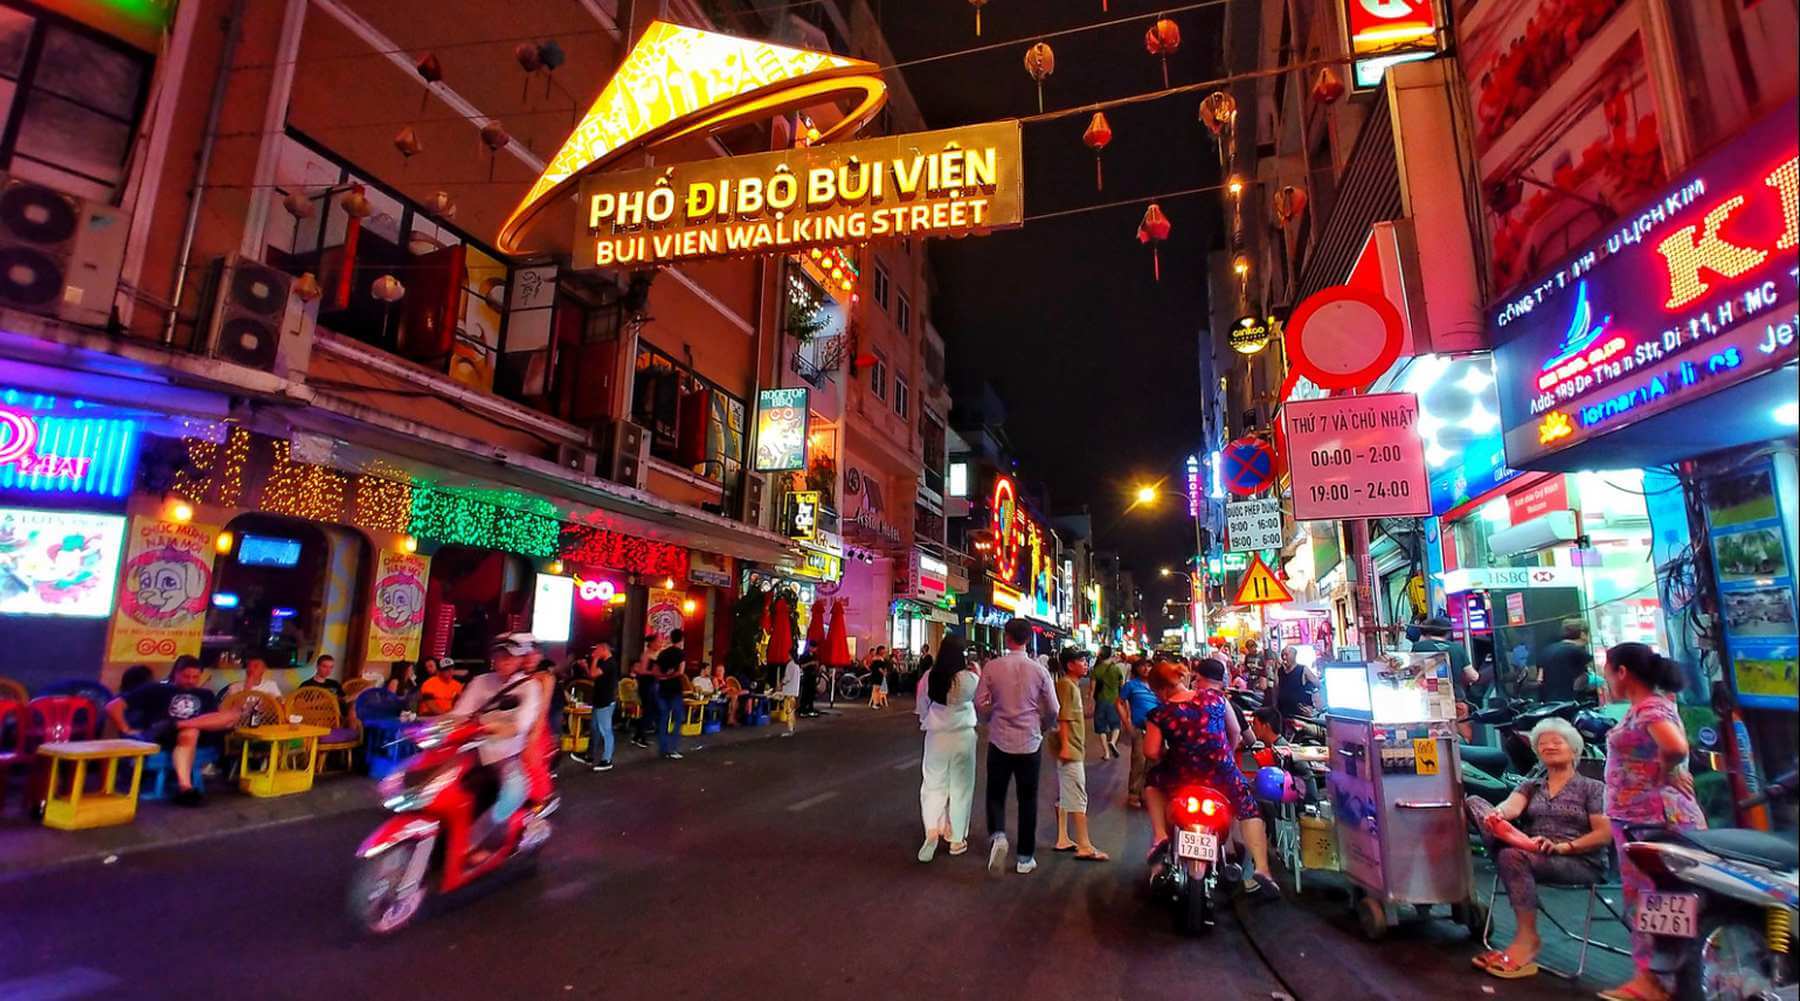 Ho Chi Minh City Nightlife: Look no further than the amazing Bui Vien Walking Street – where the culture, food, and fun come alive - Ho Chi Minh City Nightlife